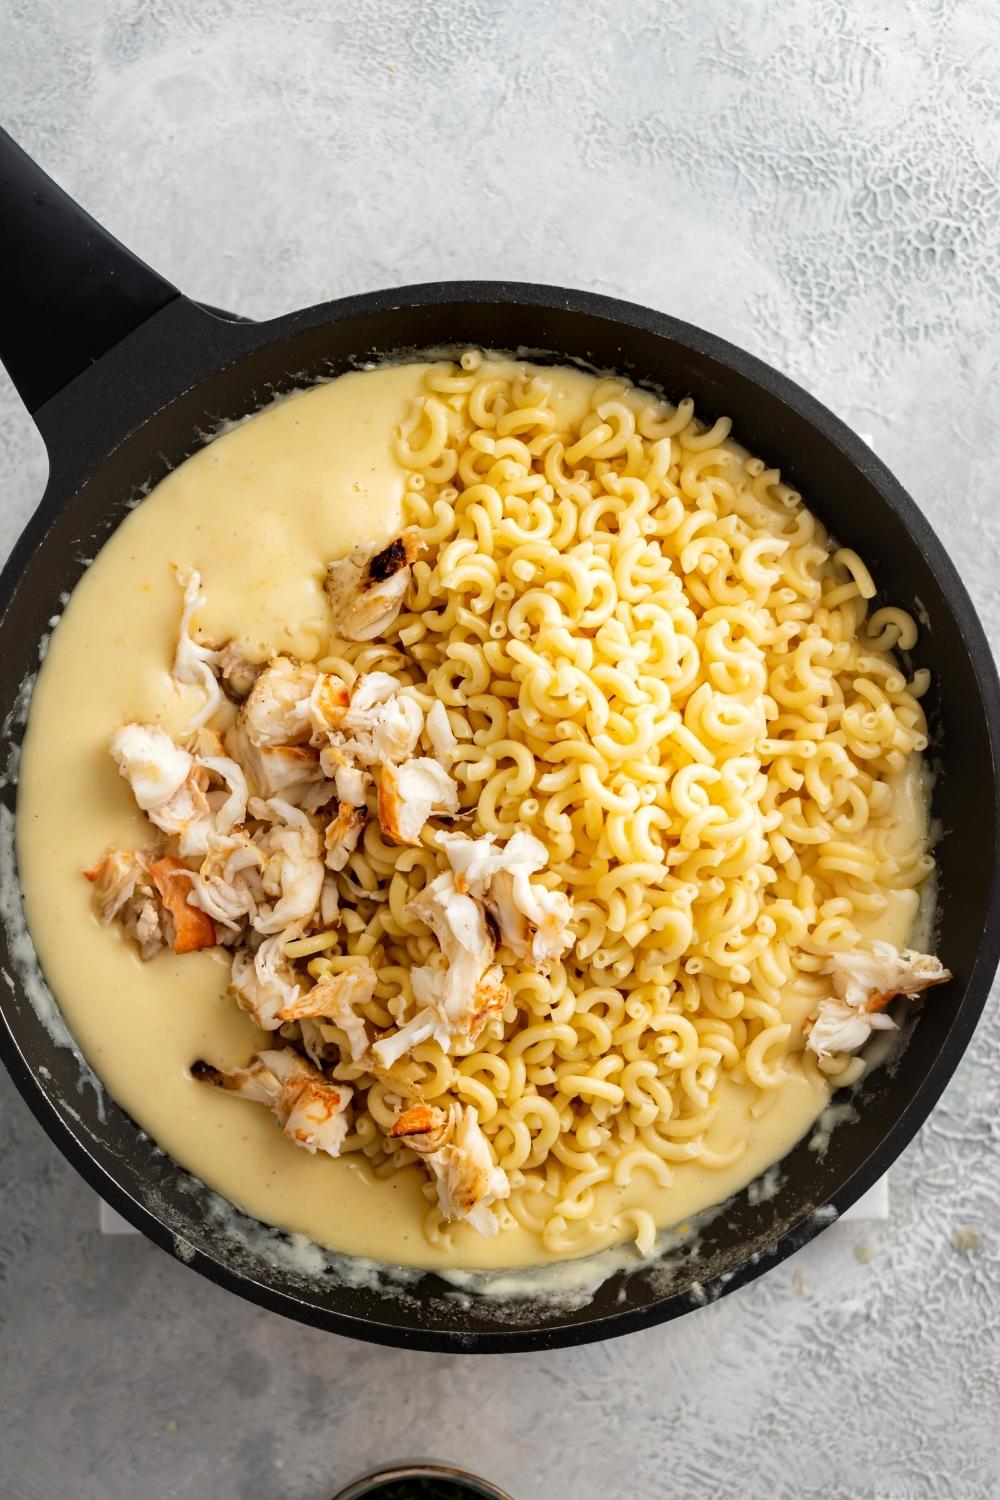 Elbow macaroni noodles, pieces of lobster, and cheese sauce all in a black skillet on a gray counter.